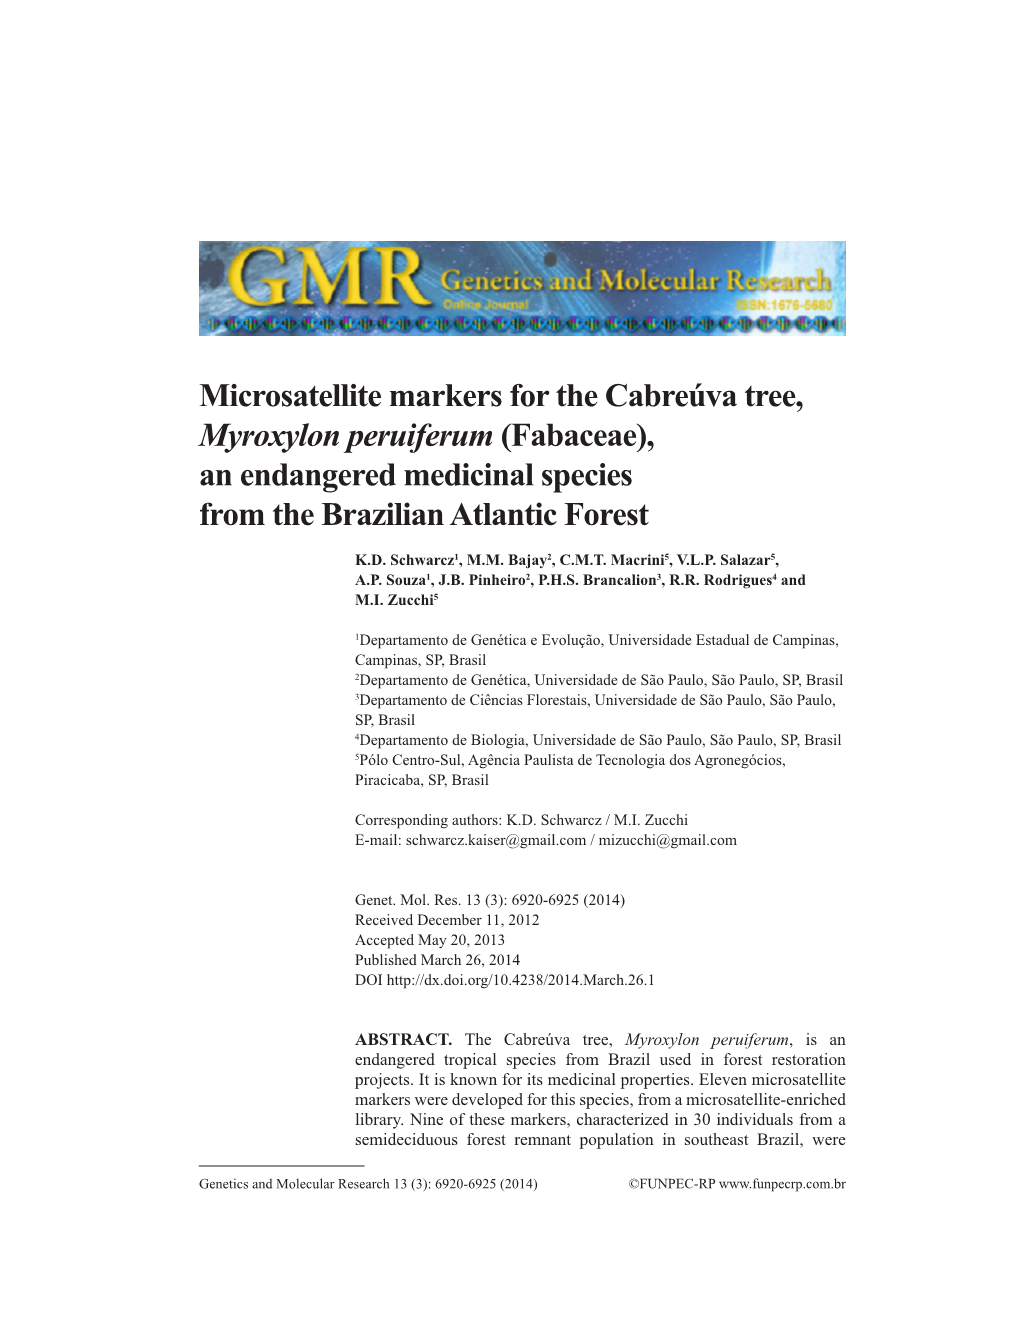 Microsatellite Markers for the Cabreúva Tree, Myroxylon Peruiferum (Fabaceae), an Endangered Medicinal Species from the Brazilian Atlantic Forest